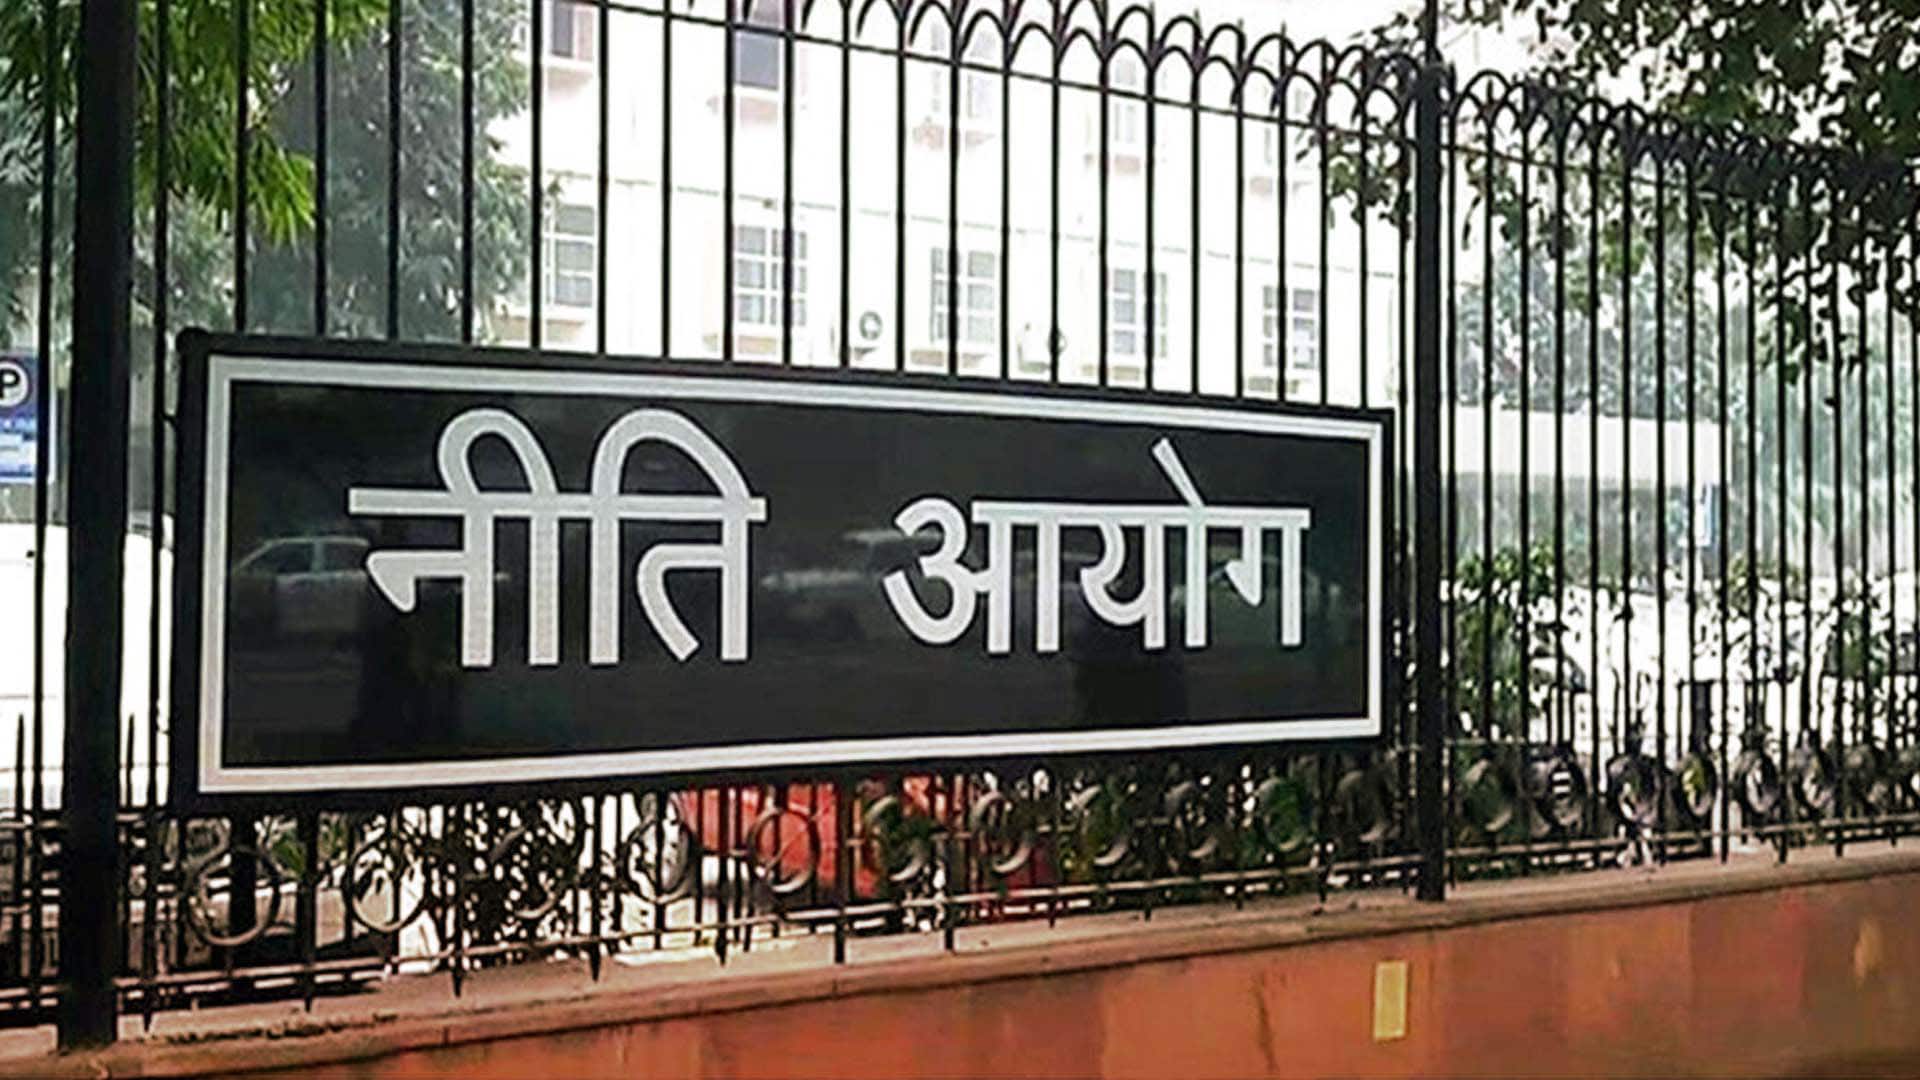 NITI Aayog launches second round of initiative to set up startup incubation centres